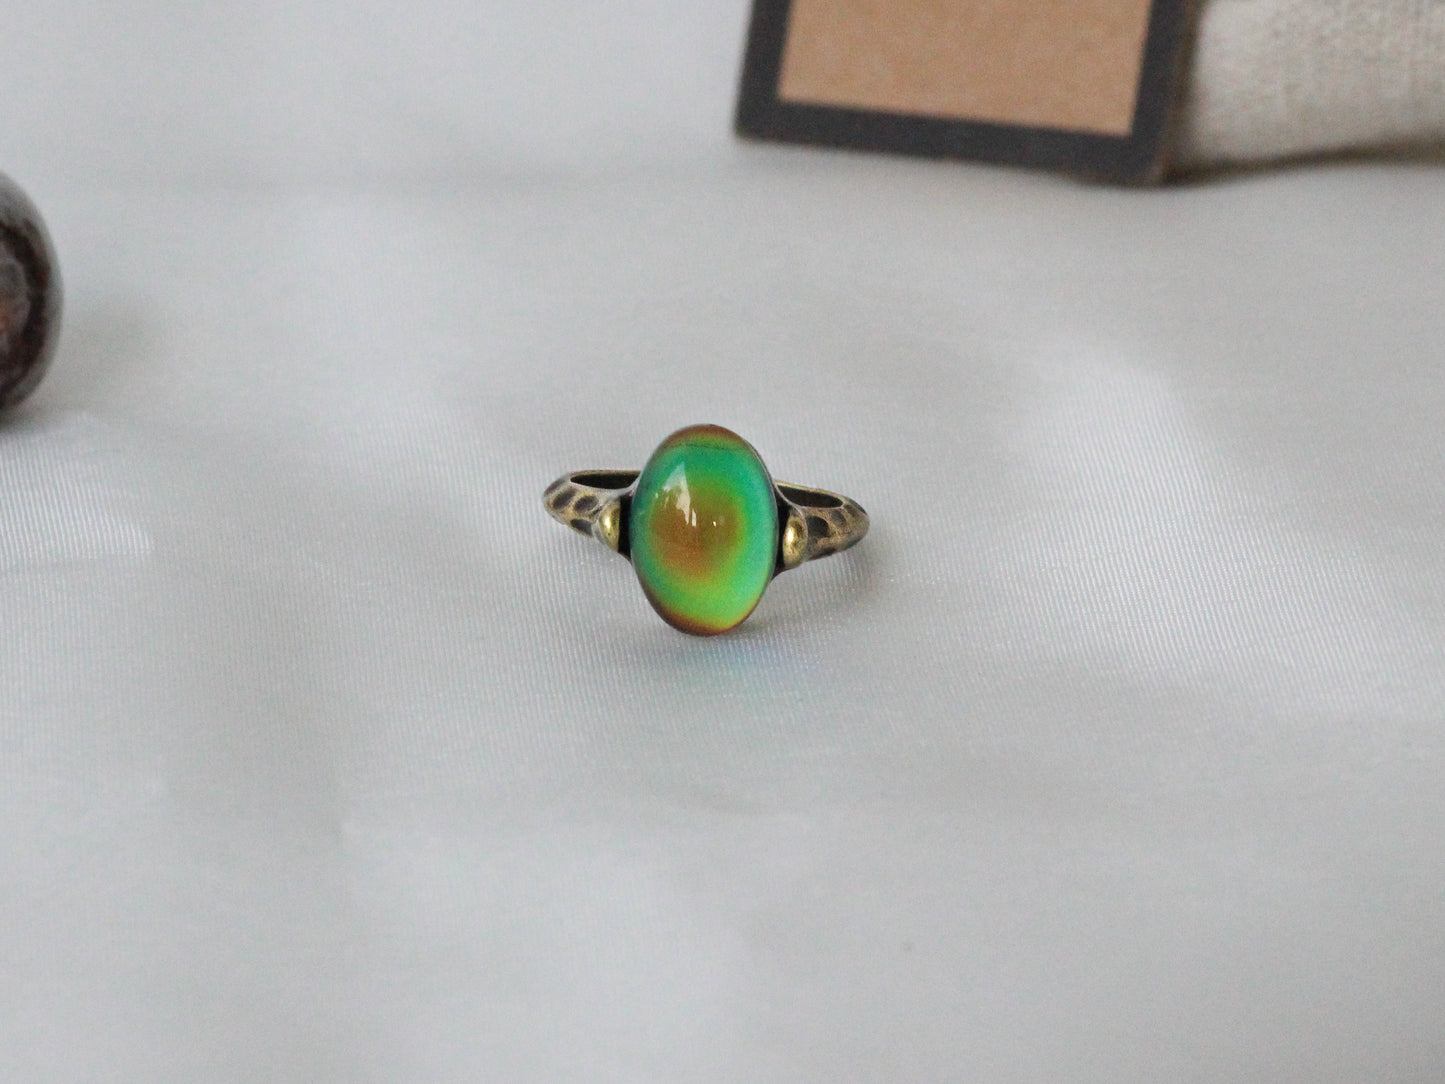 Antique Gold Plating Borderless Oval Stone Mood Ring.